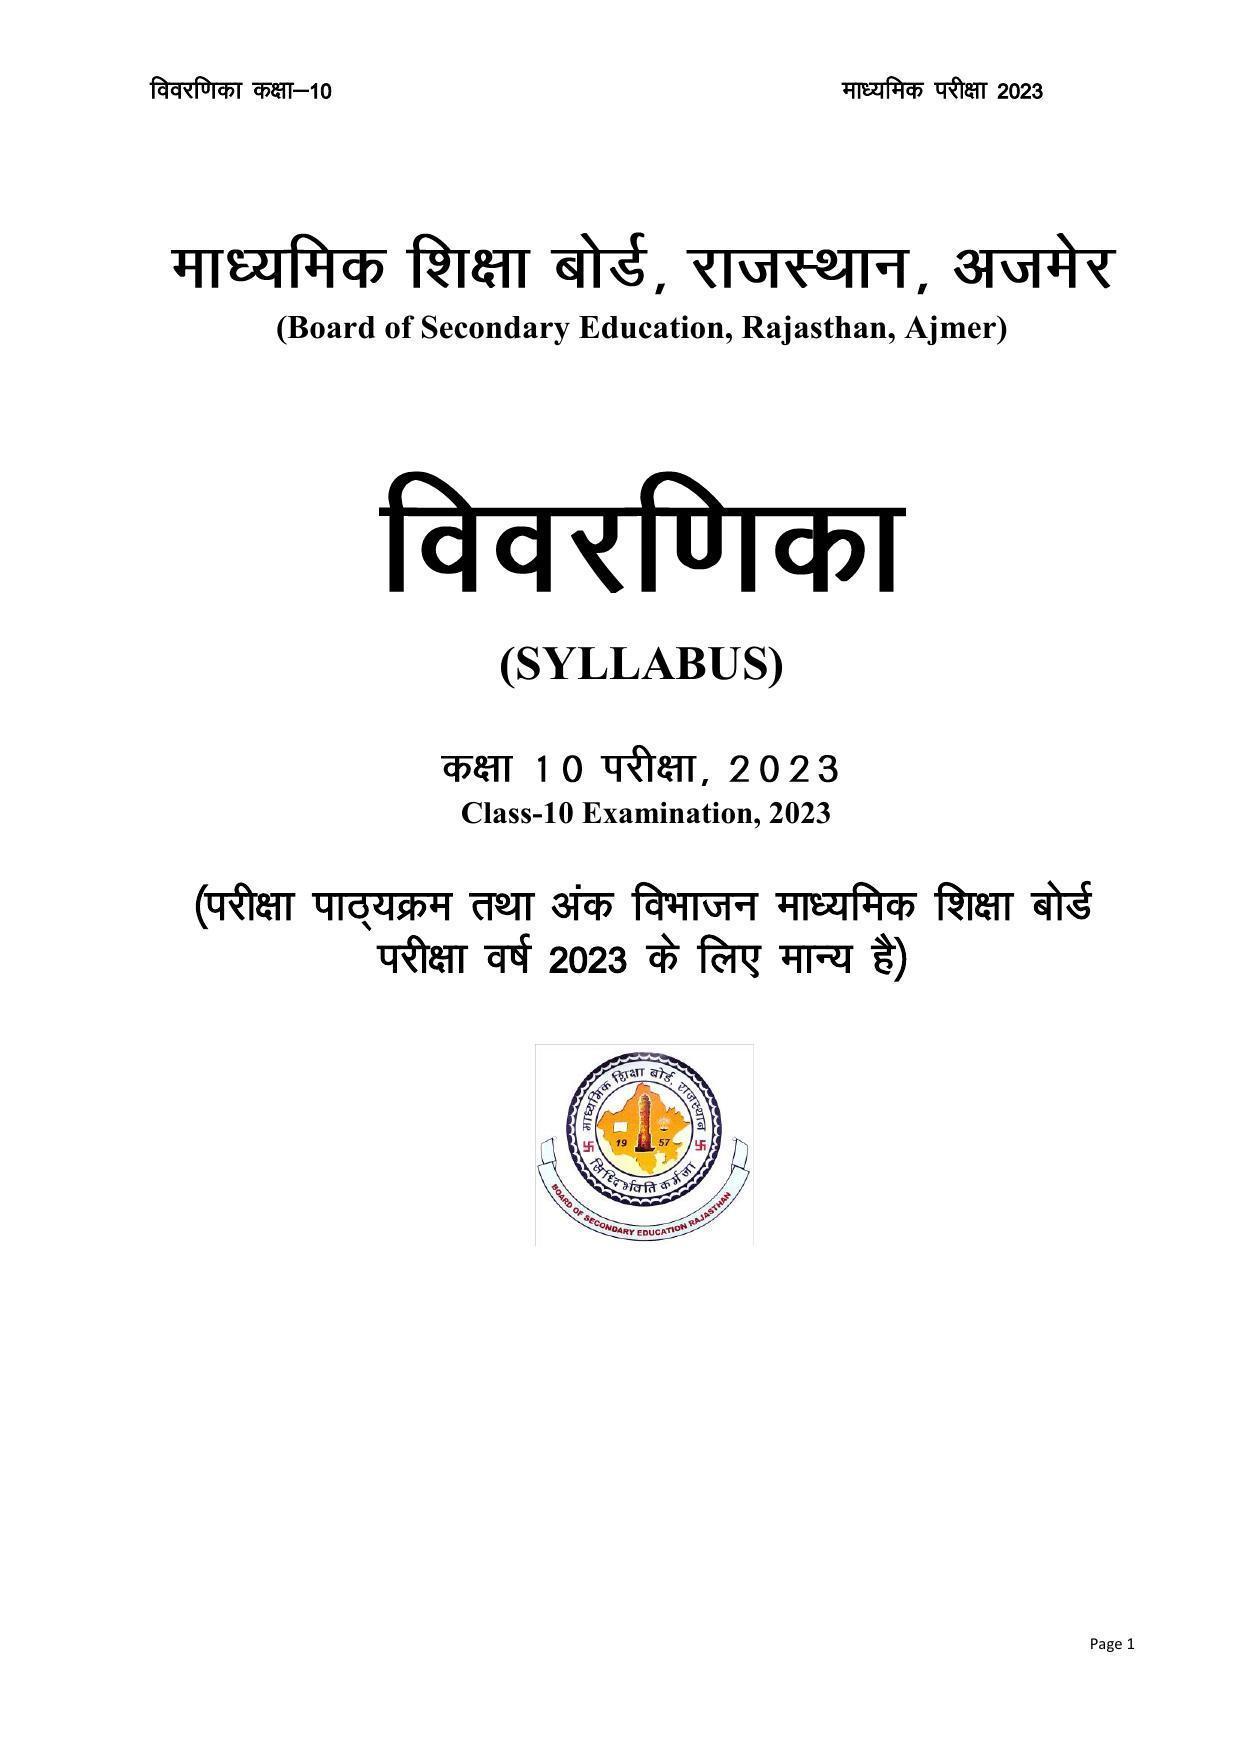 RBSE Class 10 Complete Syllabus 2023 - Page 1